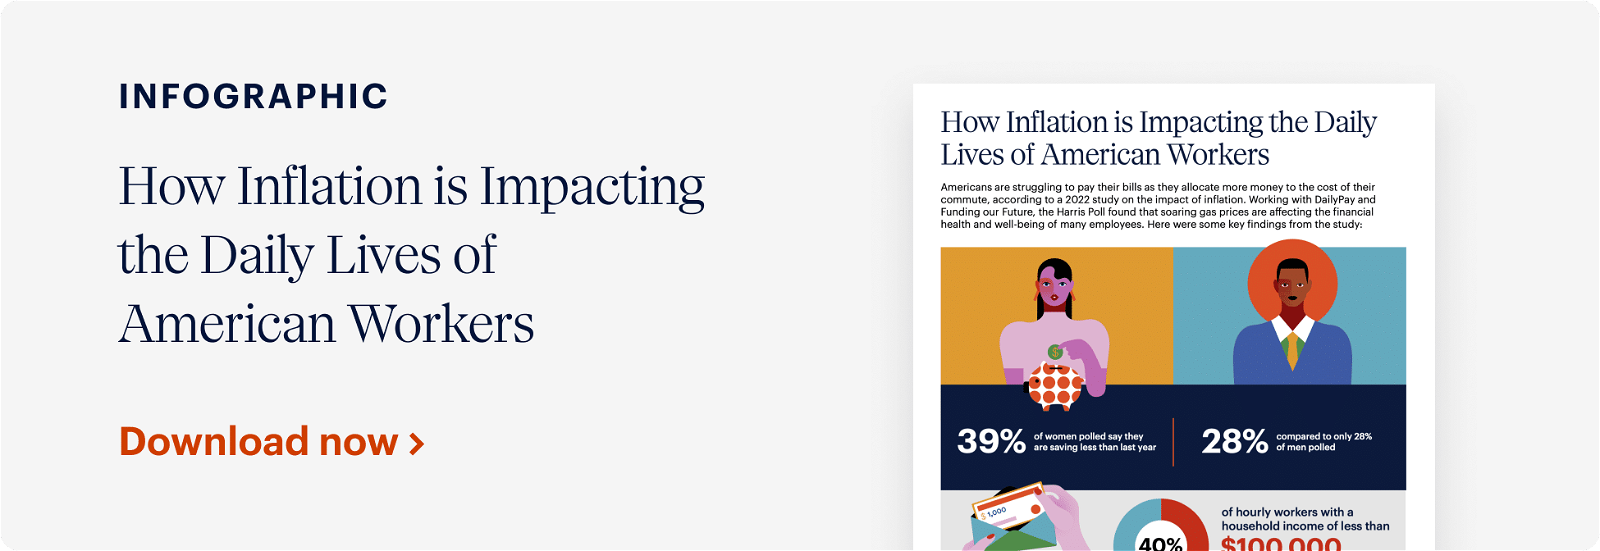 Infographic titled "How Inflation is Impacting the Daily Lives of American Workers." It features stats like "39% of Americans delay or avoiding major life events," and "28% report cutting back on essentials." Includes visuals of a woman worried about finances and a person grocery shopping. Download now button on the left.